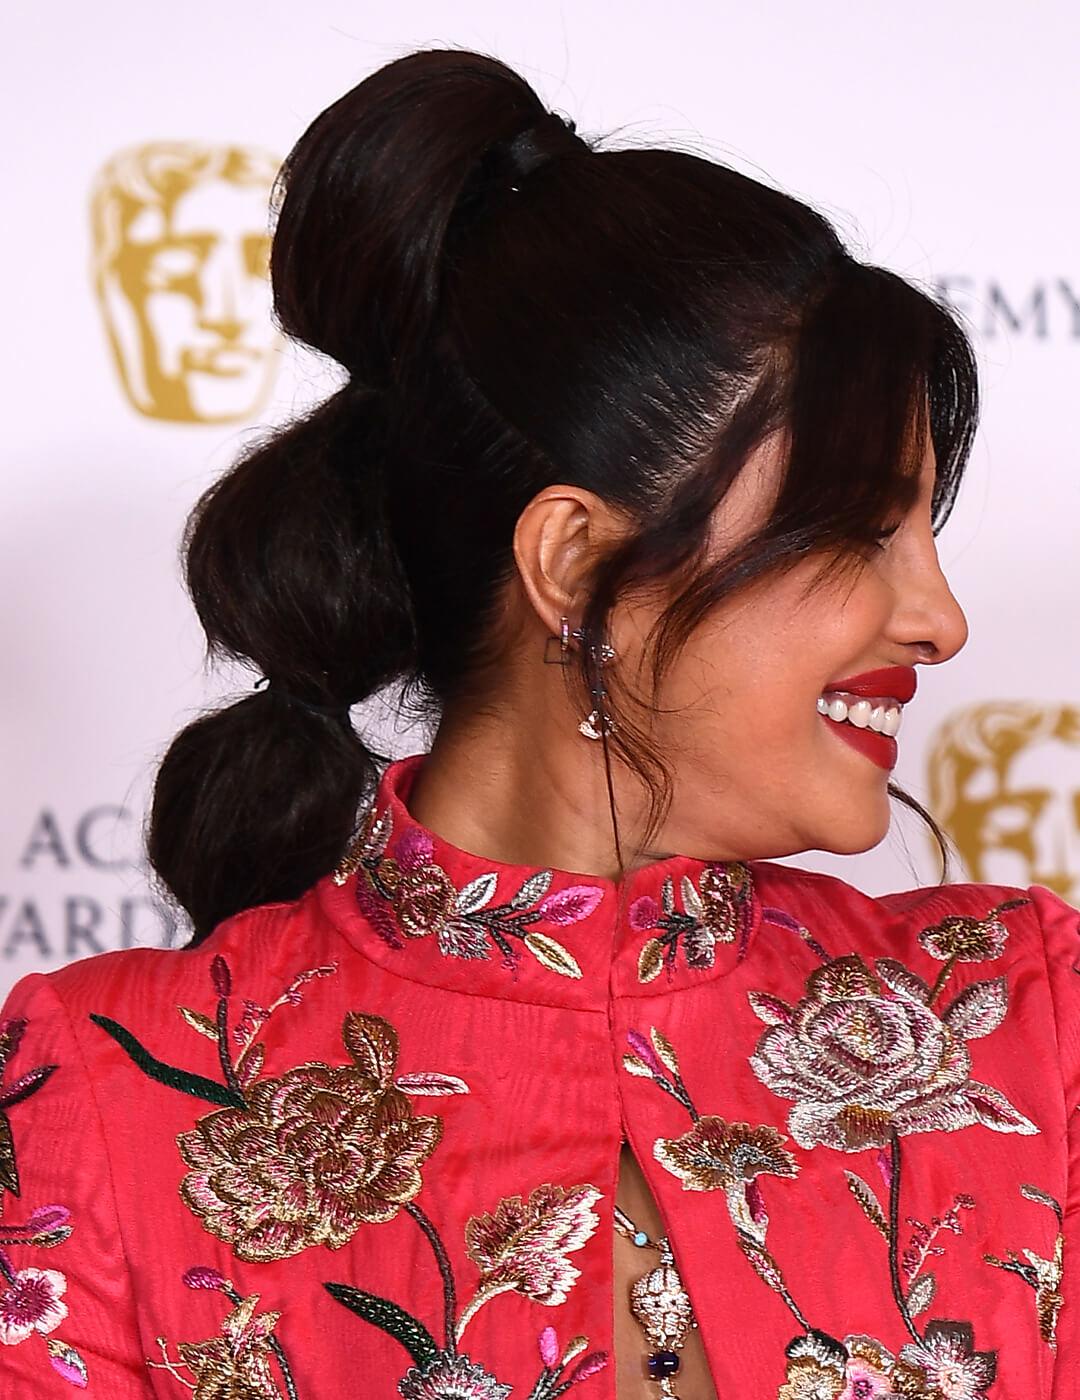 Close-up side profile of Priyanka Chopra Jonas rocking a bubble ponytail hairstyle and red floral dress